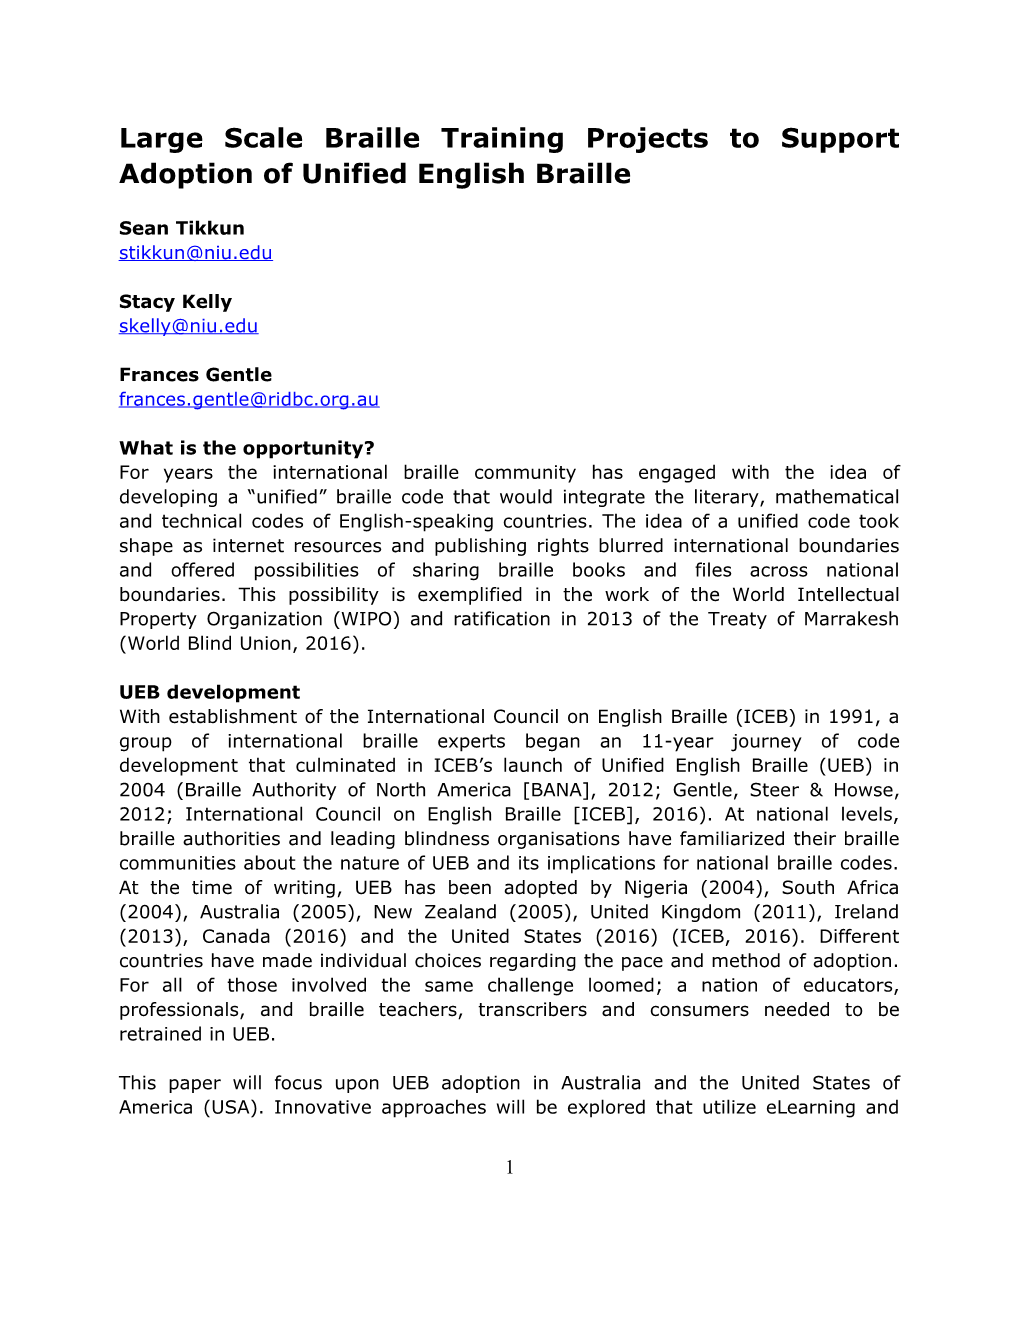 Large Scale Braille Training Projects to Support Adoption of Unified English Braille